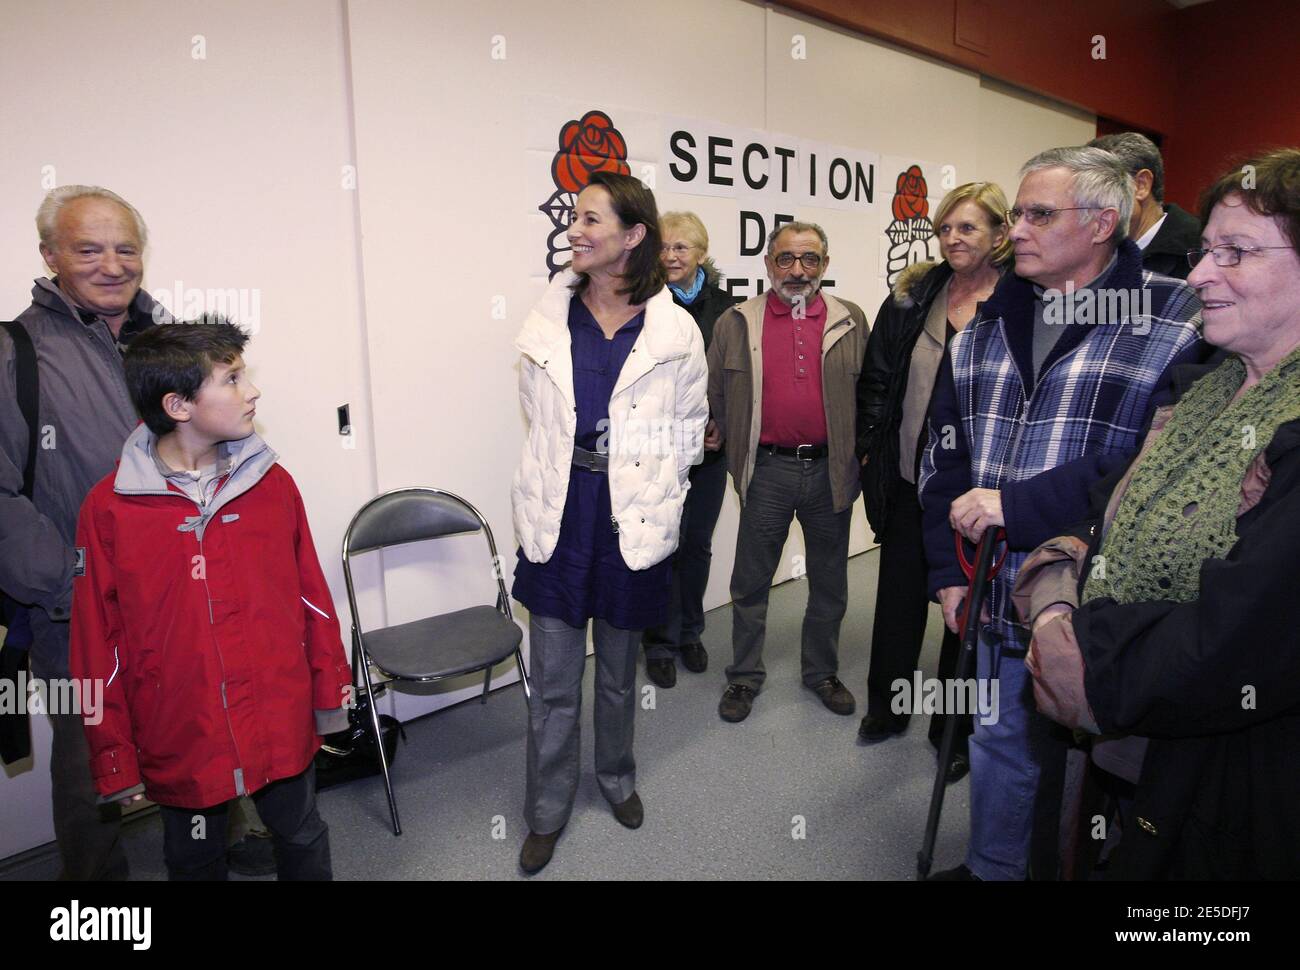 Segolene Royal, one of three candidates who is campaigning to become head of French Socialist Party at a polling station in Melle, France on November 20, 2008. Photo by Patrick Bernard/ABACAPRESS.COM Stock Photo